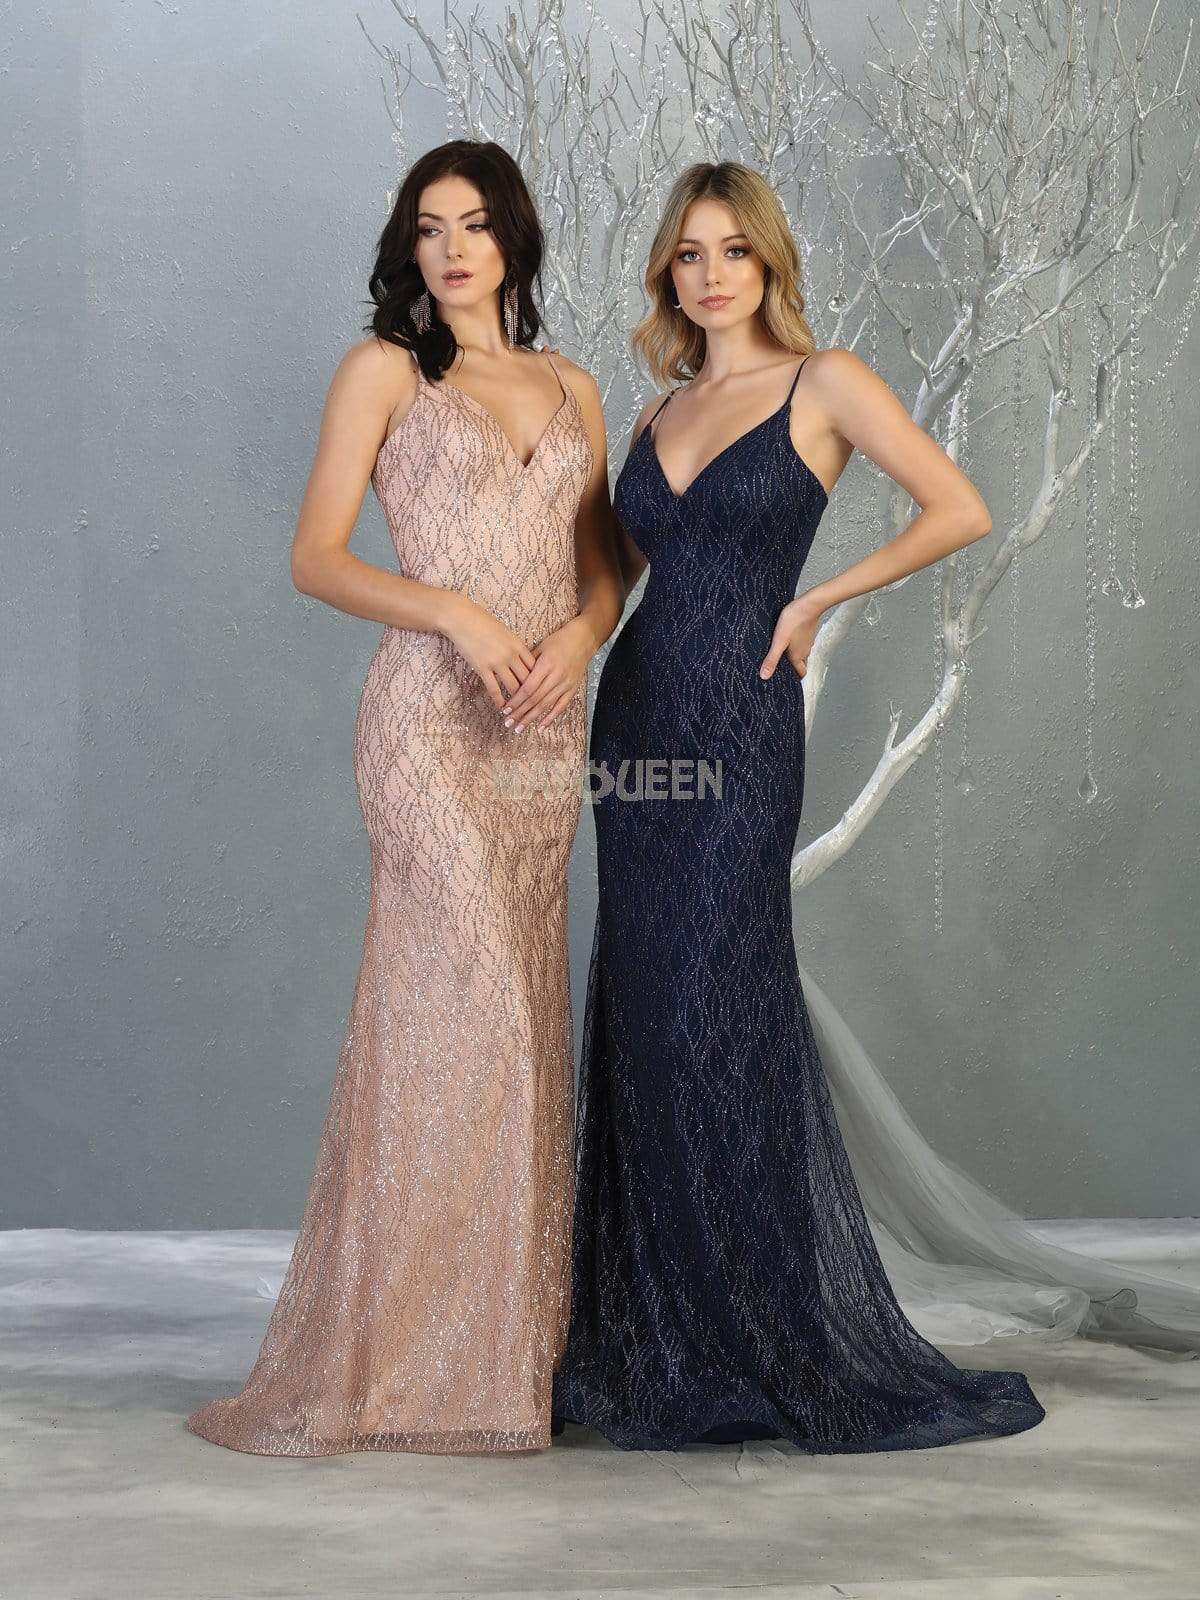 May Queen - MQ1790 Embellished Plunging V-neck Trumpet Dress Prom Dresses